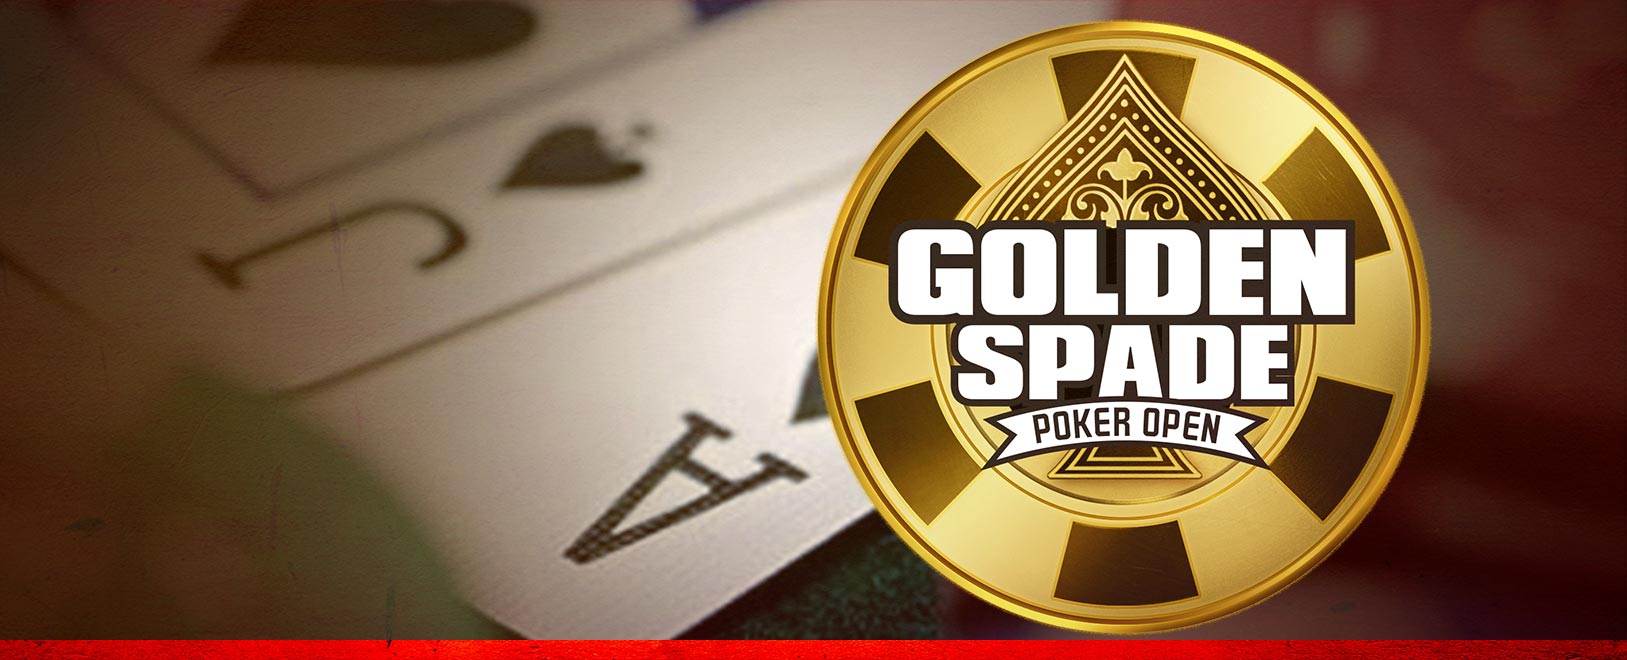 Deposit and Learn Poker and Win Over 10 Million at GSPO